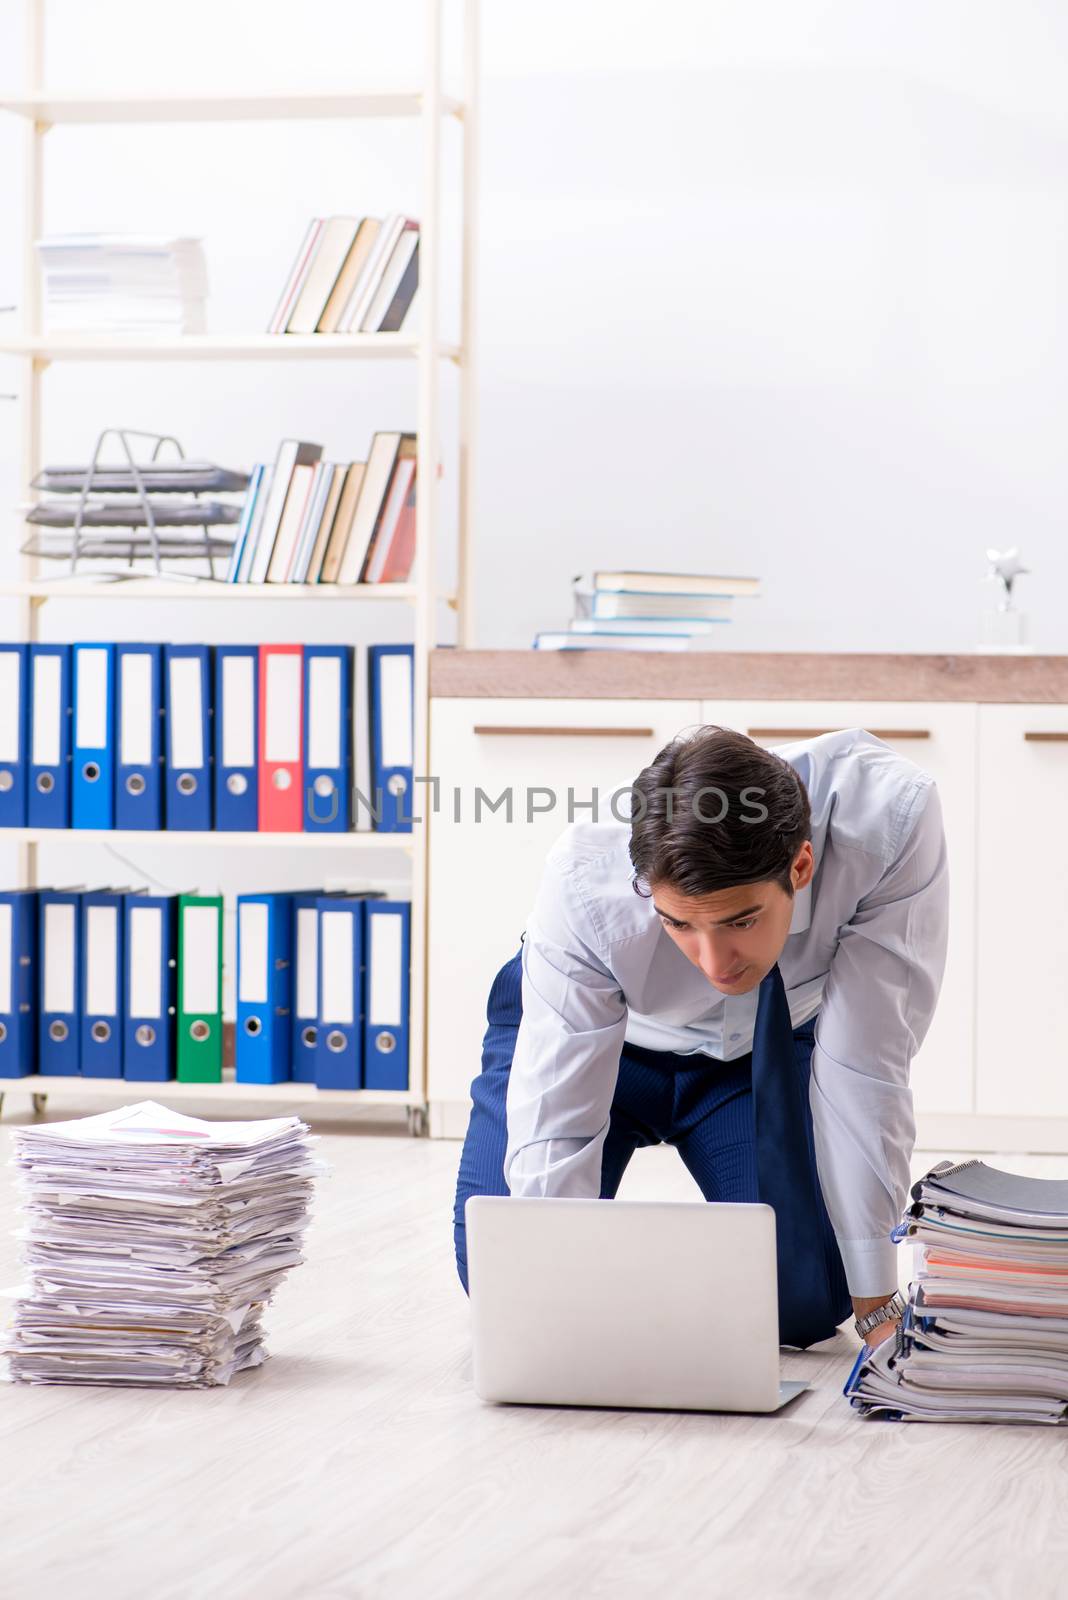 Extremely busy employee working in the office